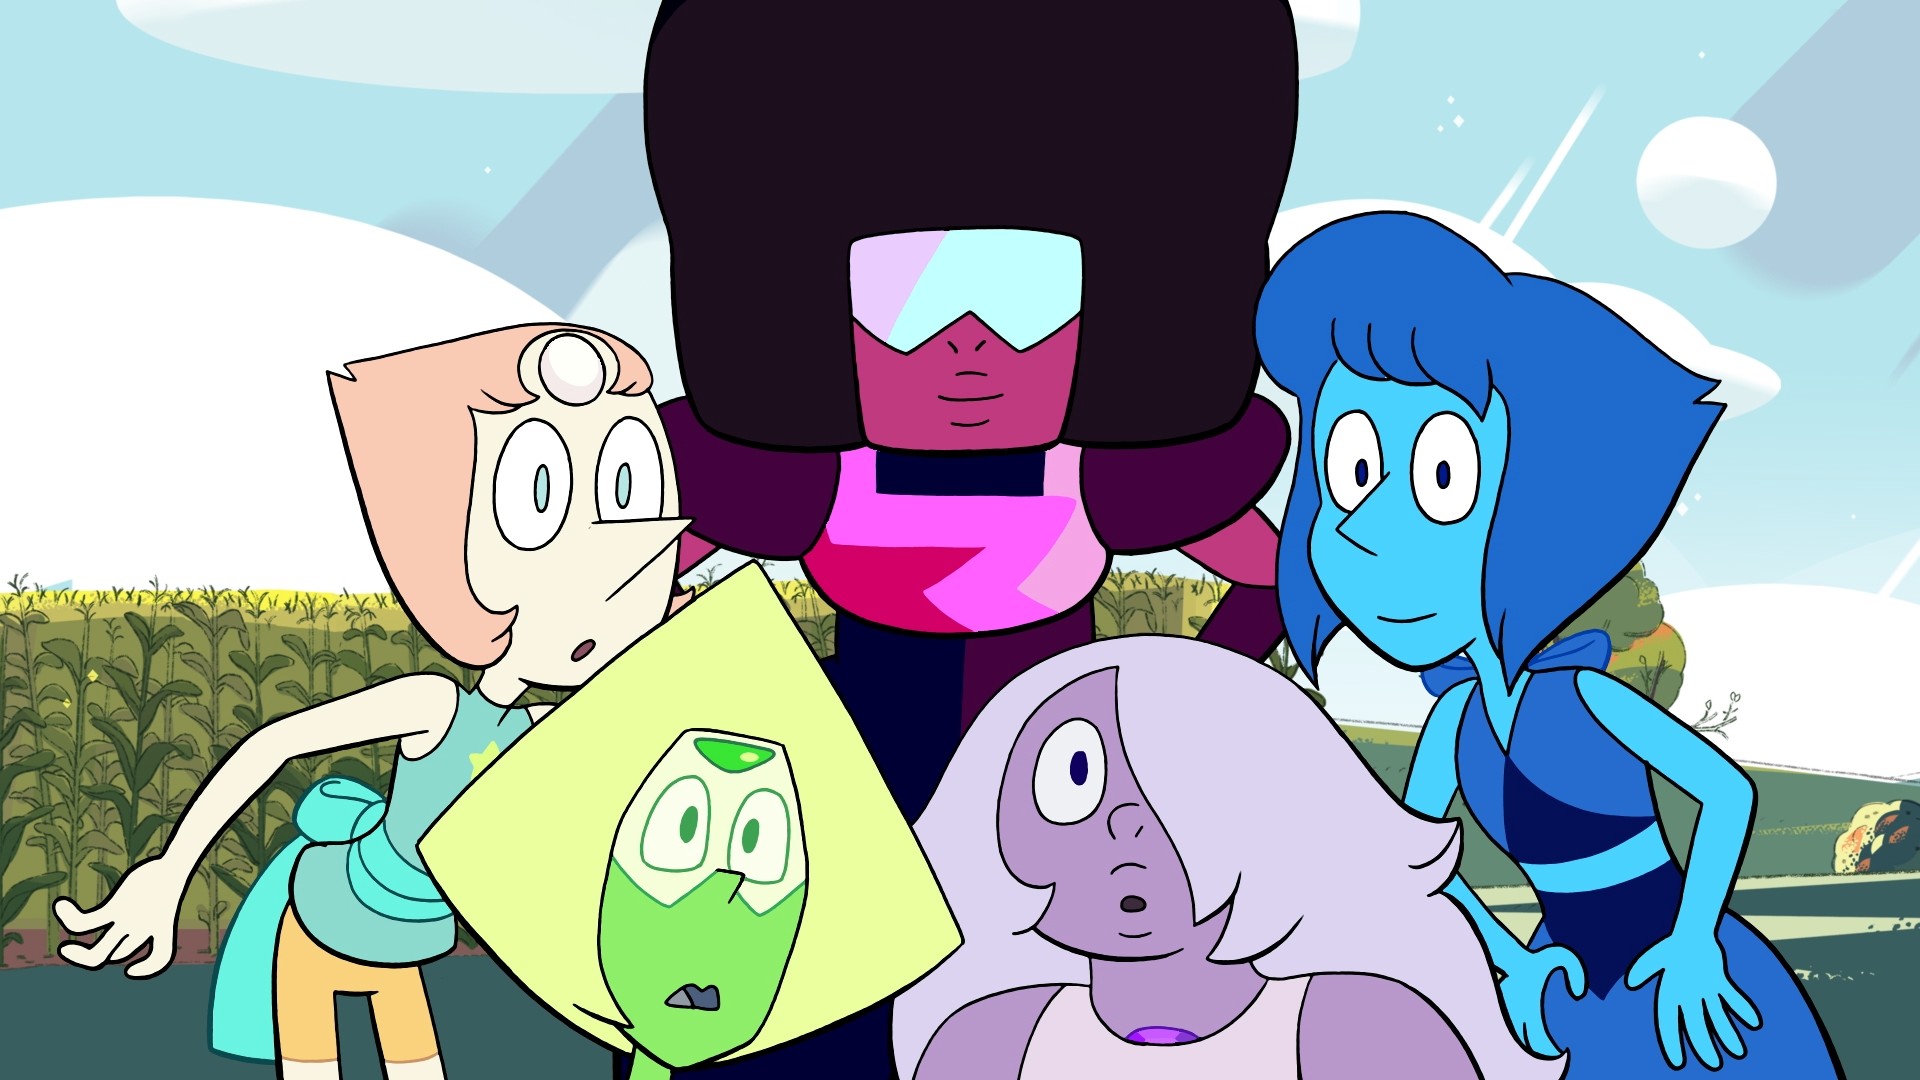 1920x1080 It's always nice to see a happy picture of all the Earth Gems together.